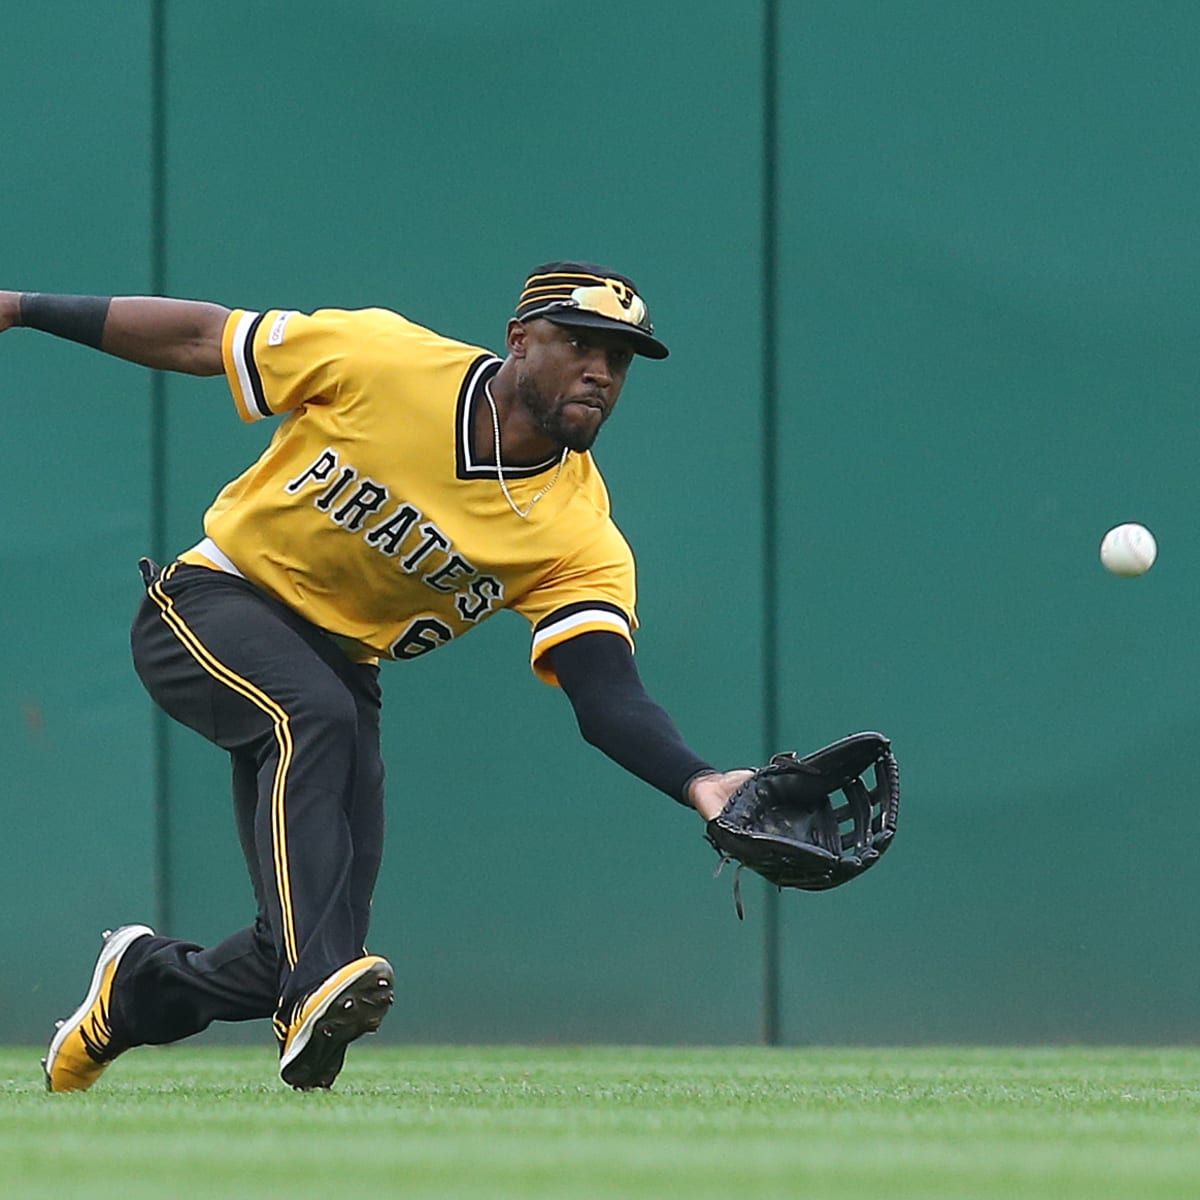 Texas Rangers Have Reportedly Contacted Pirates on Starling Marte